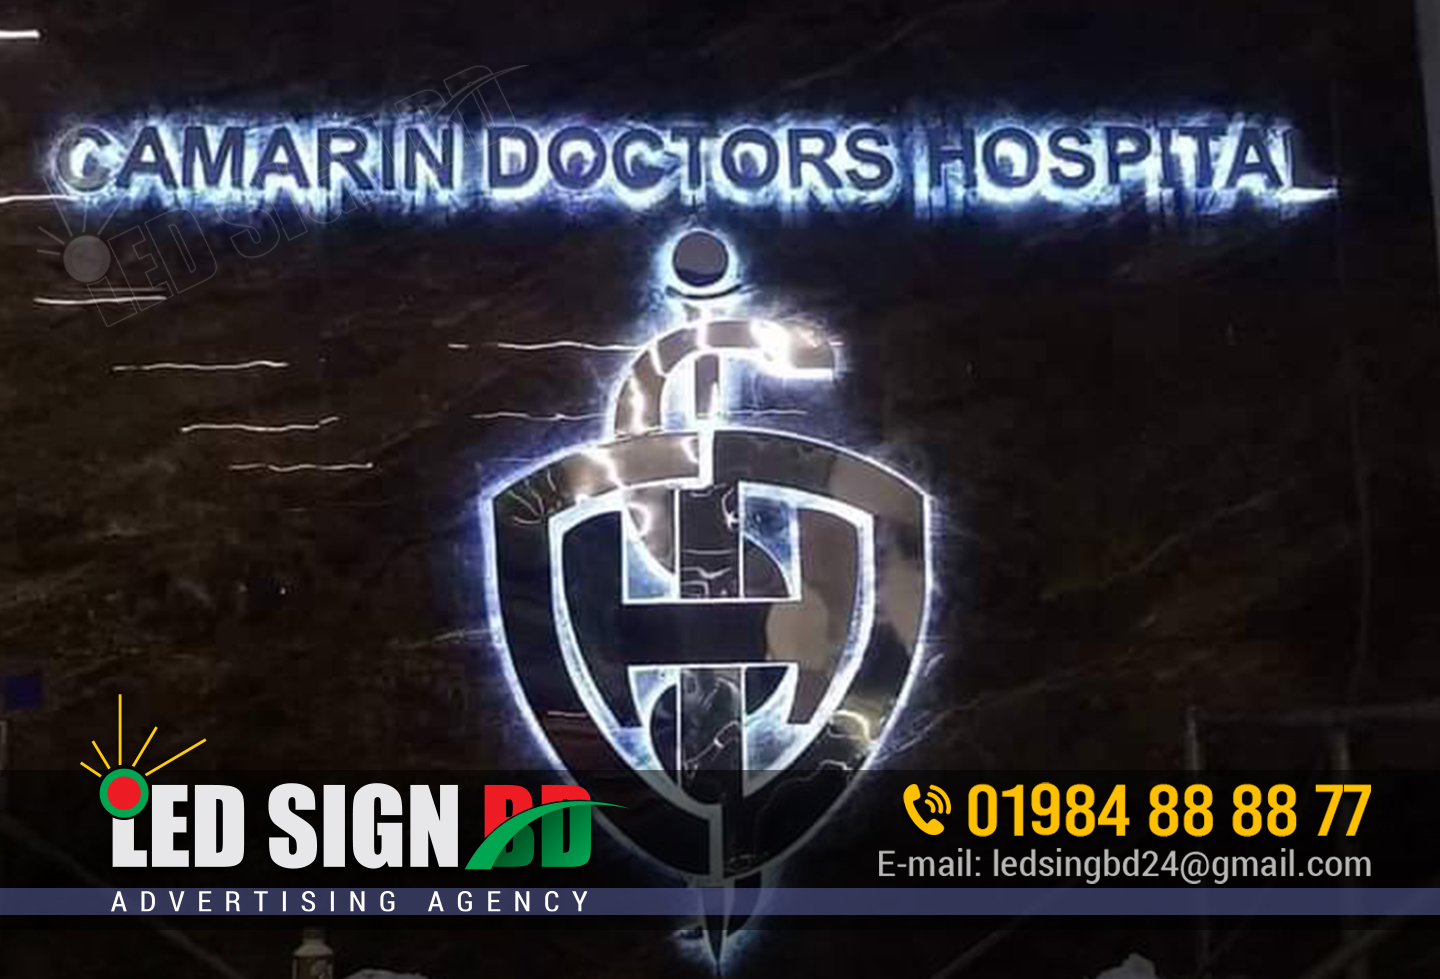 SS Top Letter Signs, SS Sign Board SS Top Letter Acrylic Top Letter SS Metal Lett, SS Sign Board SS Top Letter Acrylic Top Letter SS Metal Letter LED Light Box Stainless Steel Signage SS Display Stand SS Plates Sign Acrylic Channel Letters Laser Cutting Signs Board LED Module Light Water Proof LED Power Supply Waterproof Indoor Signage Outdoor Signage bd,